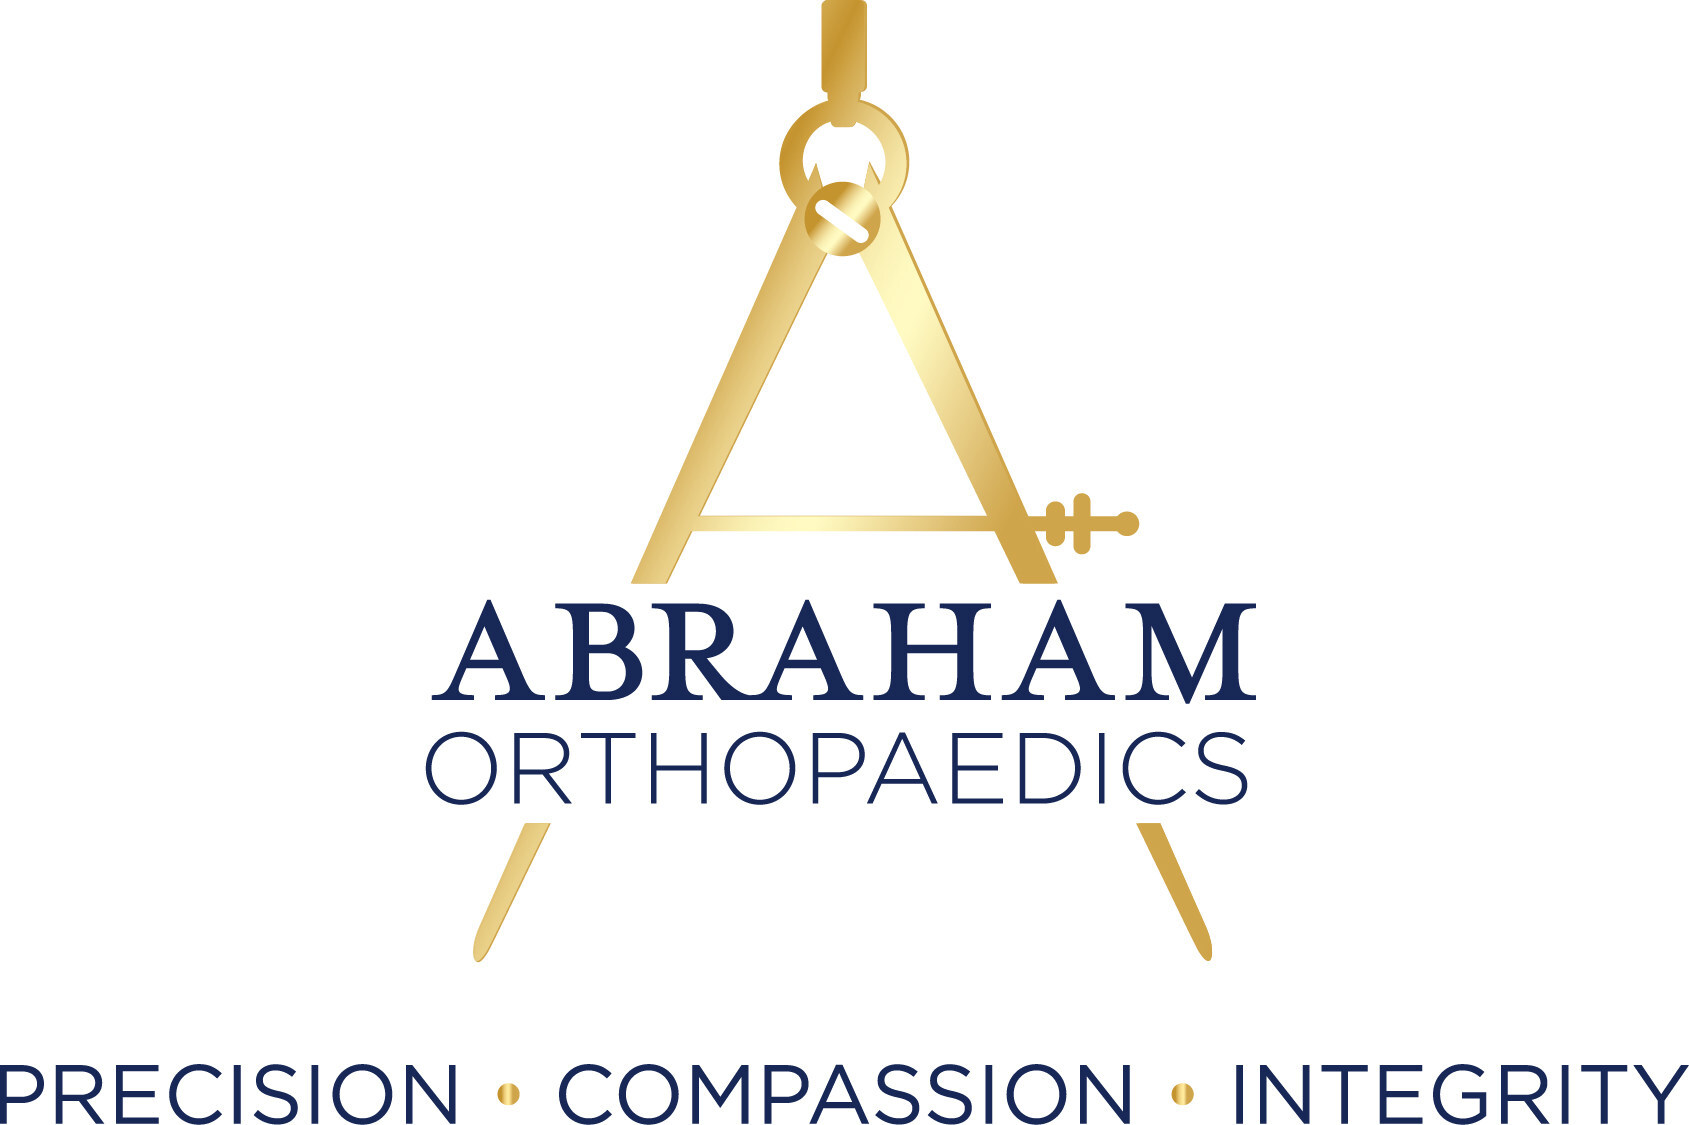 Dr. John A. Abraham Partners With Lancaster Orthopaedics Group; Opens Office in Lancaster, PA